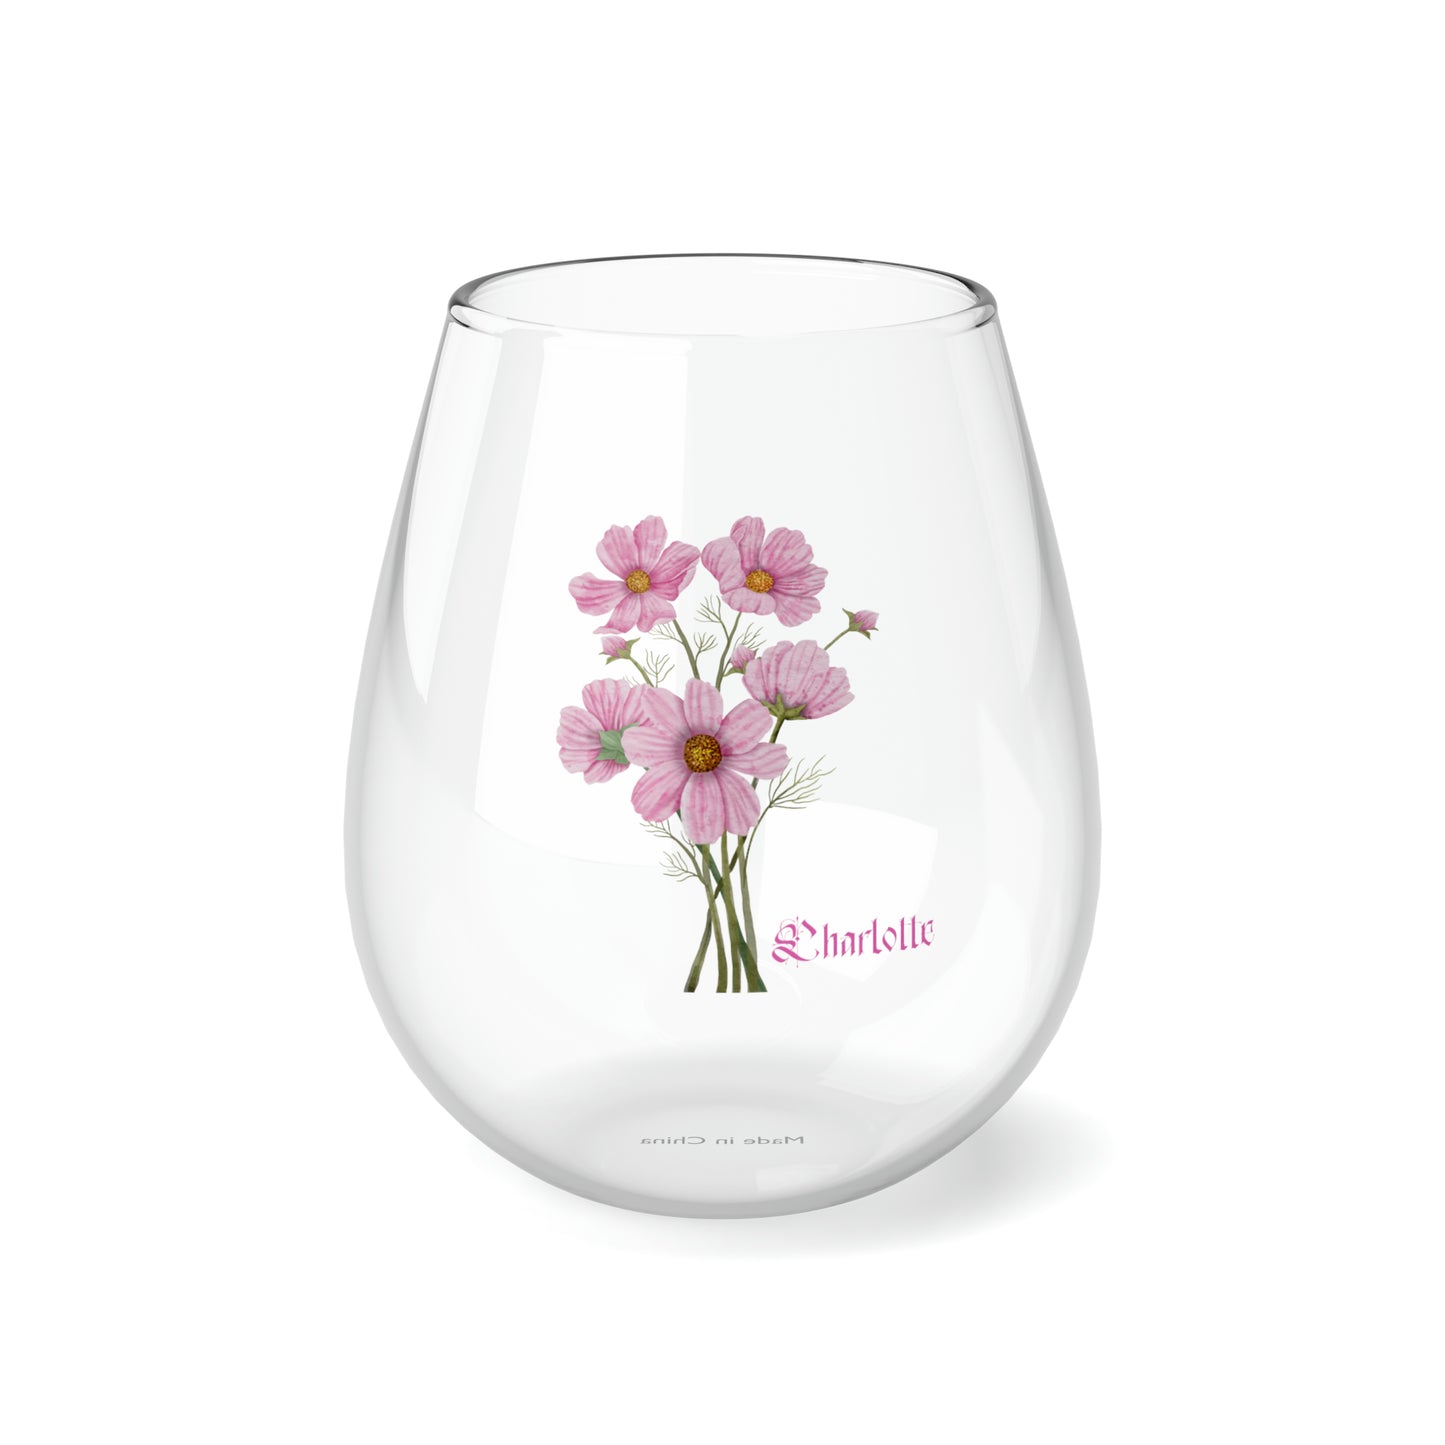 October PERSONALIZED Birth Flower Wine Glass, Birth Flower Gifts, Birth Flower wine glass, Birth Flower Gifts for Women, Gift for coworker, sister gift, birthday gift, Valentine gift, Stemless Wine Glass, 11.75oz